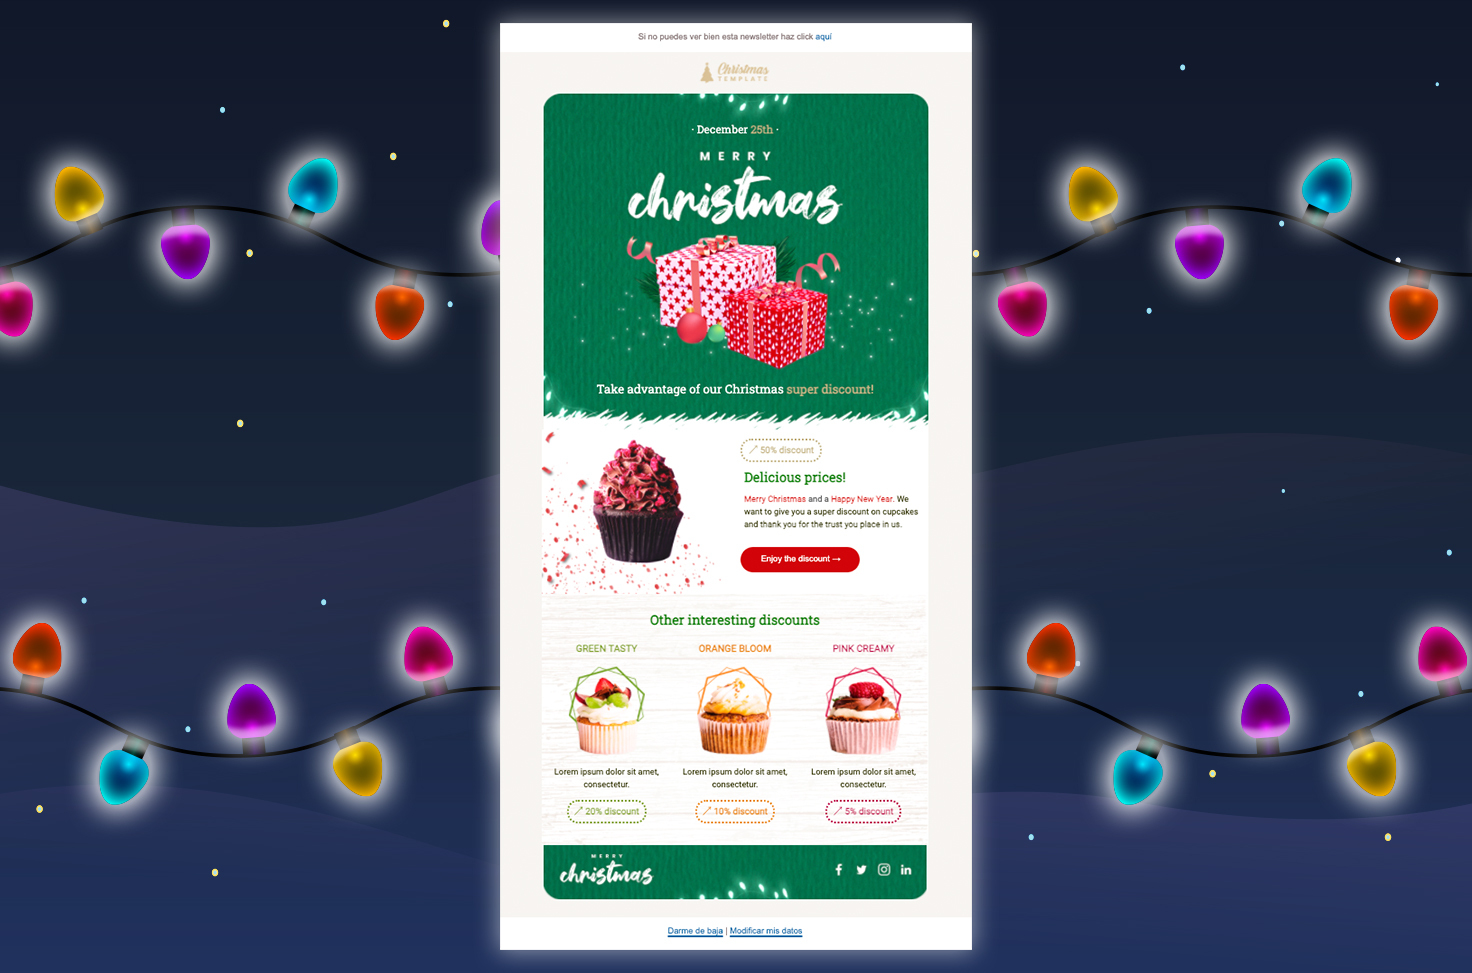 Christmas email template